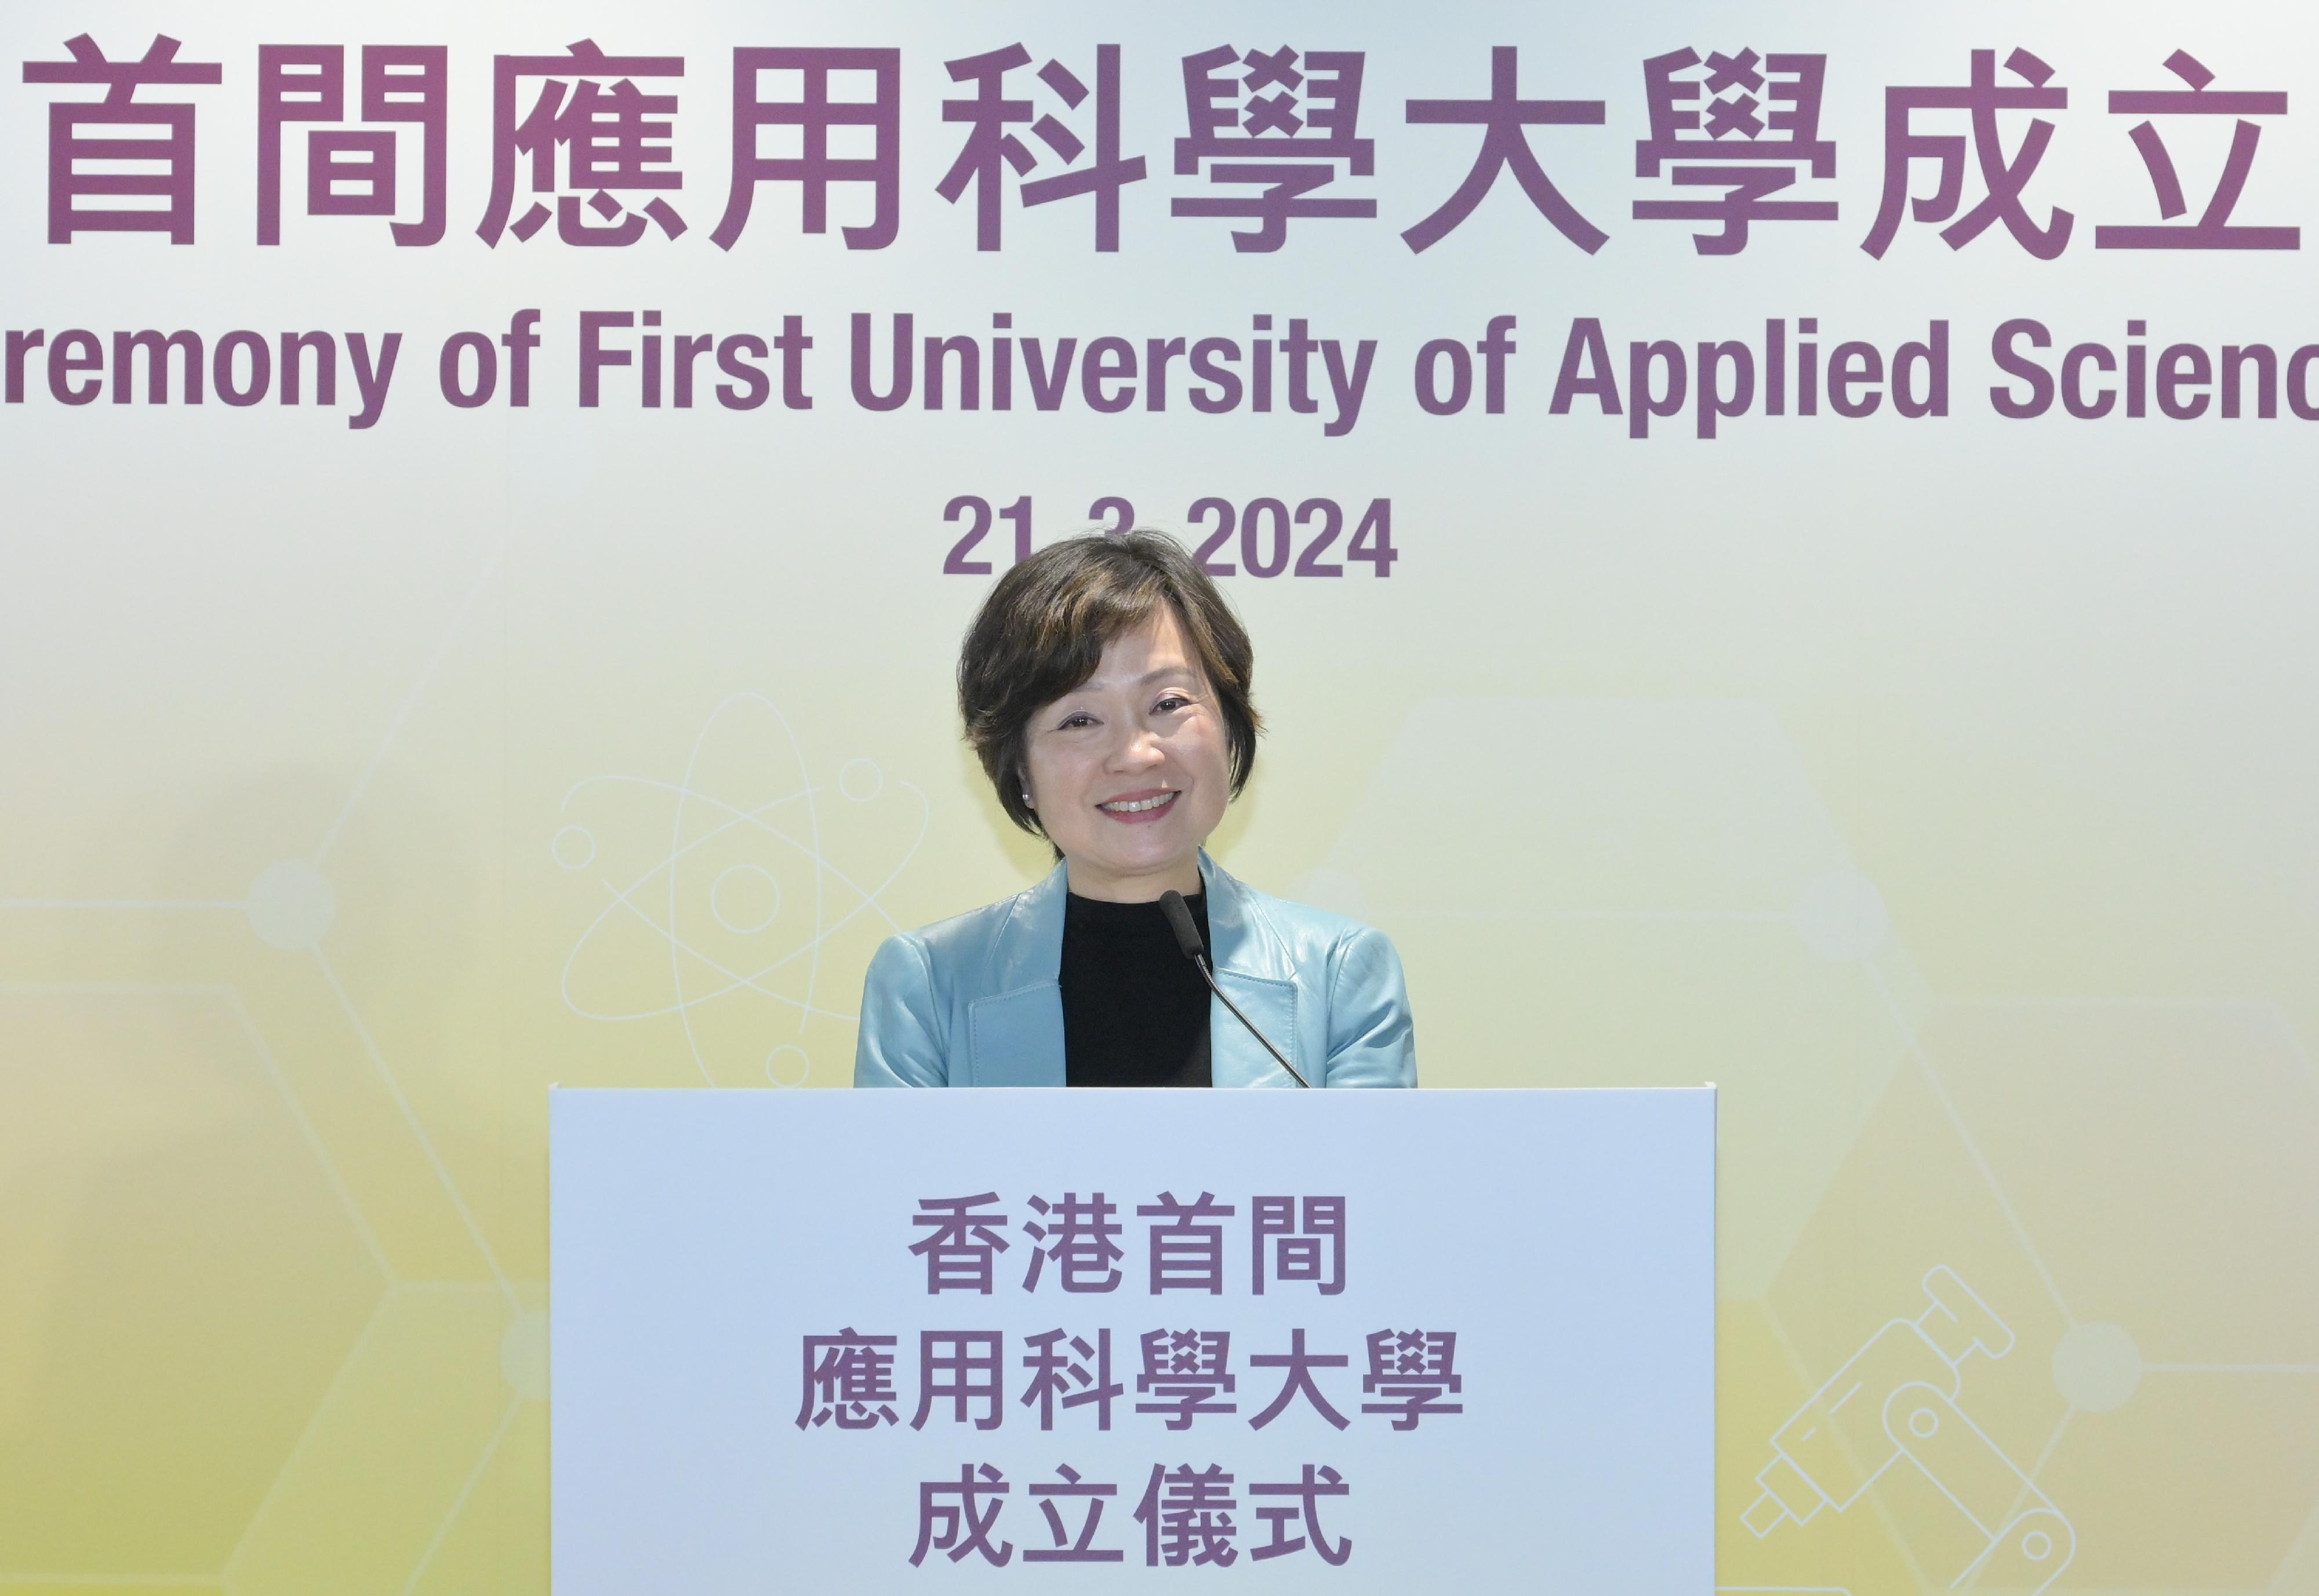 The Education Bureau announced today (March 21) that the Hong Kong Metropolitan University has become the first university of applied sciences in Hong Kong. Photo shows the Secretary for Education, Dr Choi Yuk-lin, addressing the ceremony.